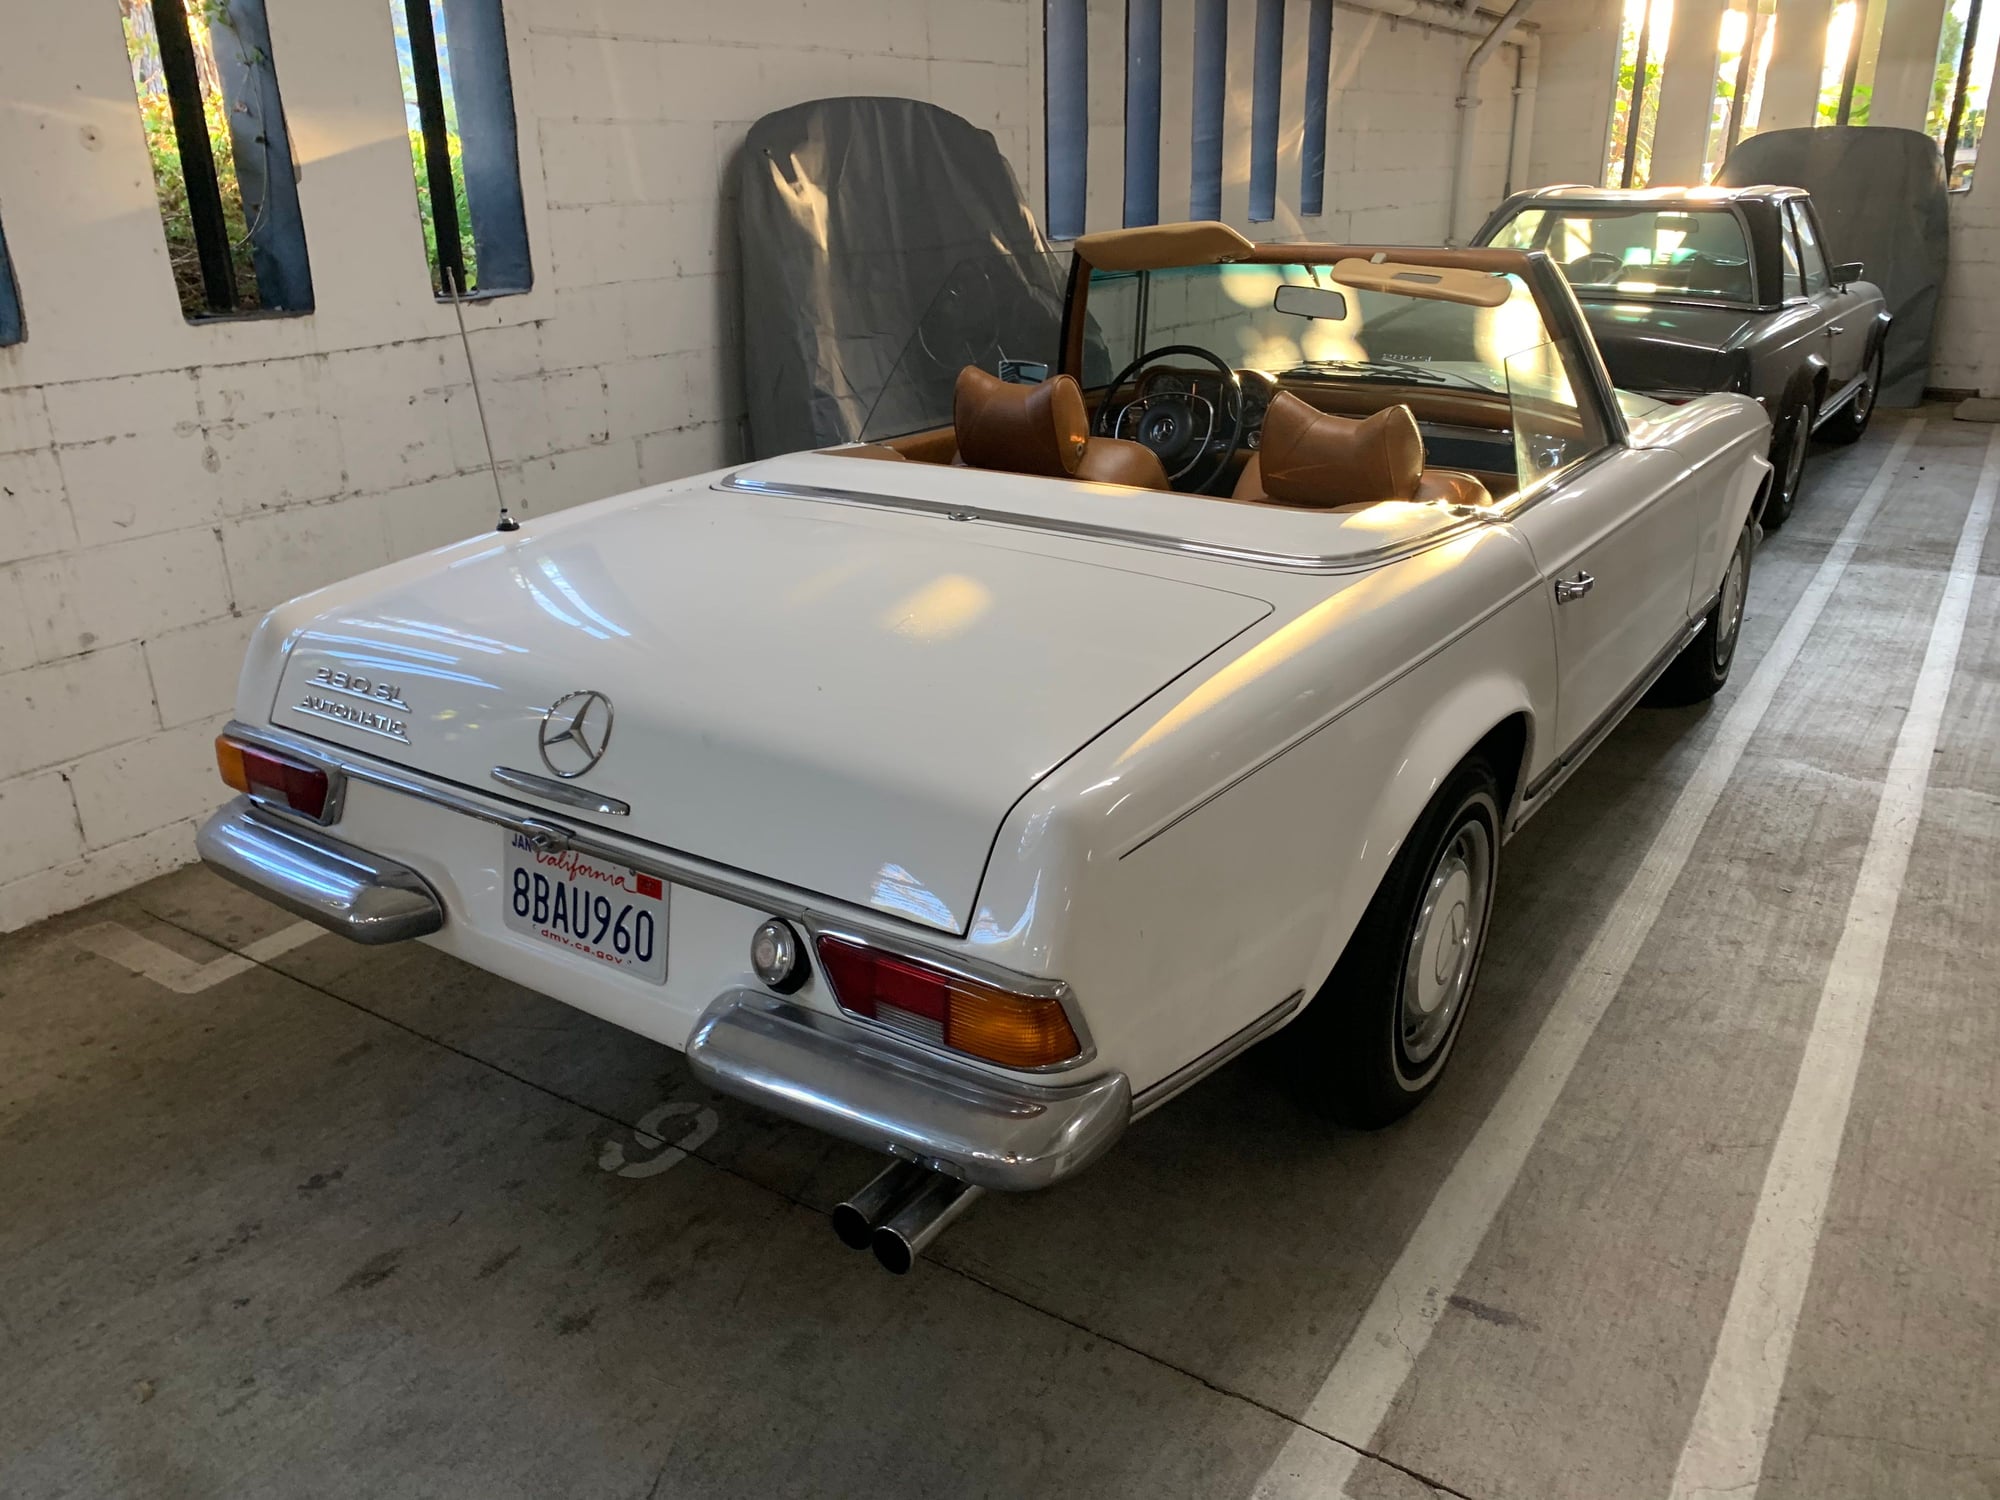 1971 Mercedes-Benz 280SL - Two 280SL drivers for the price of one! 1969 Euro & 1971 also 380sl 560sl - Used - VIN 11304412020560 - Los Angeles, CA 90069, United States